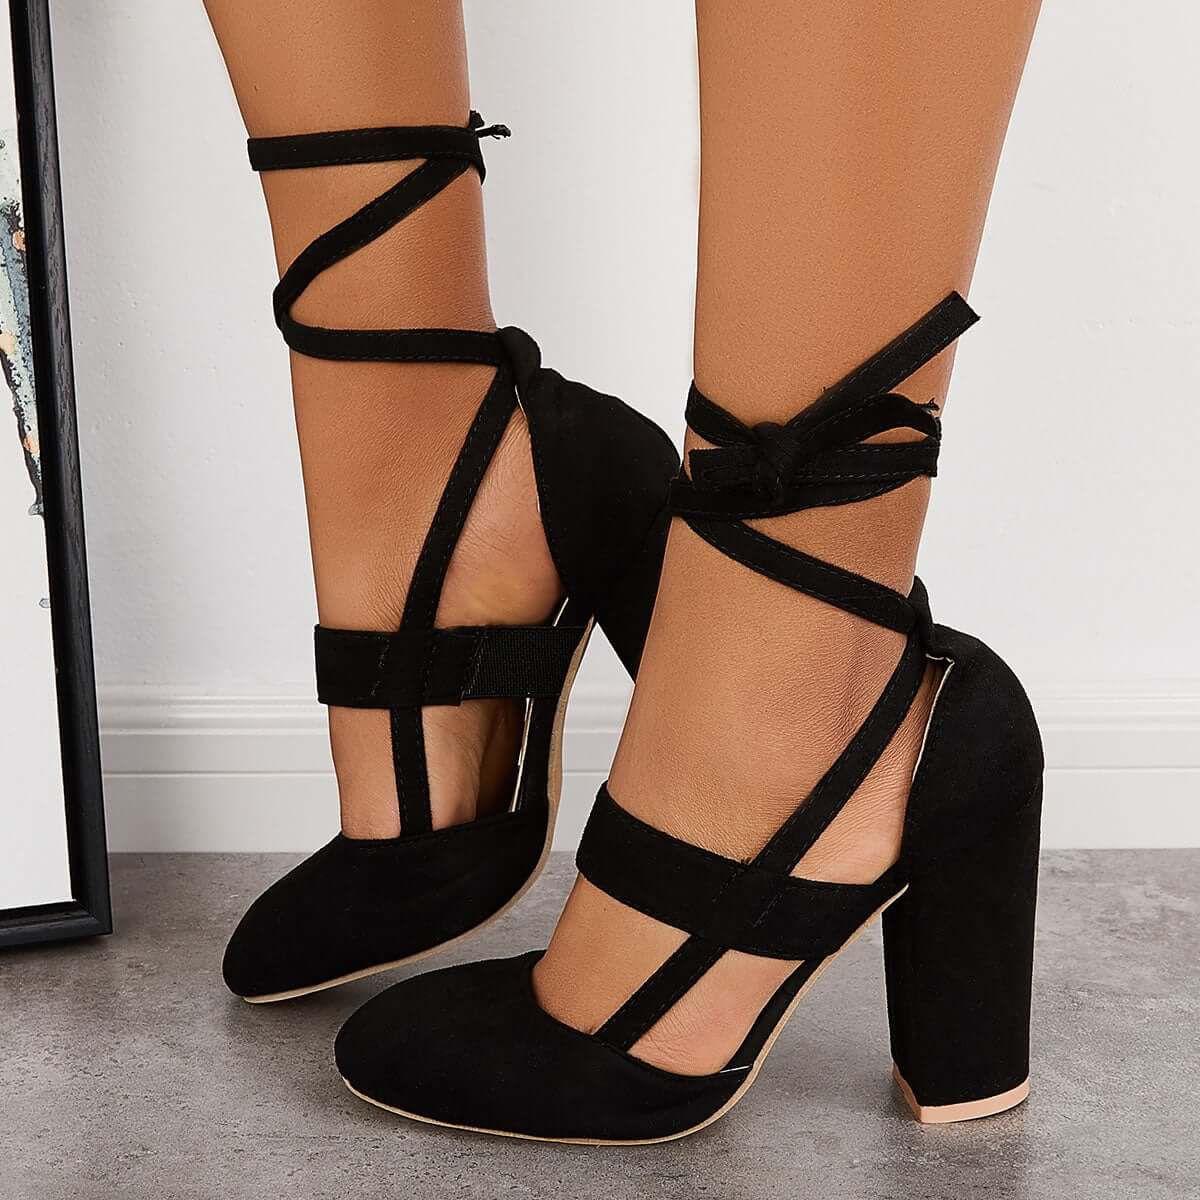 Chunky Block High Heels Lace Up Dress Sandals Ankle Strappy Pumps Pairmore